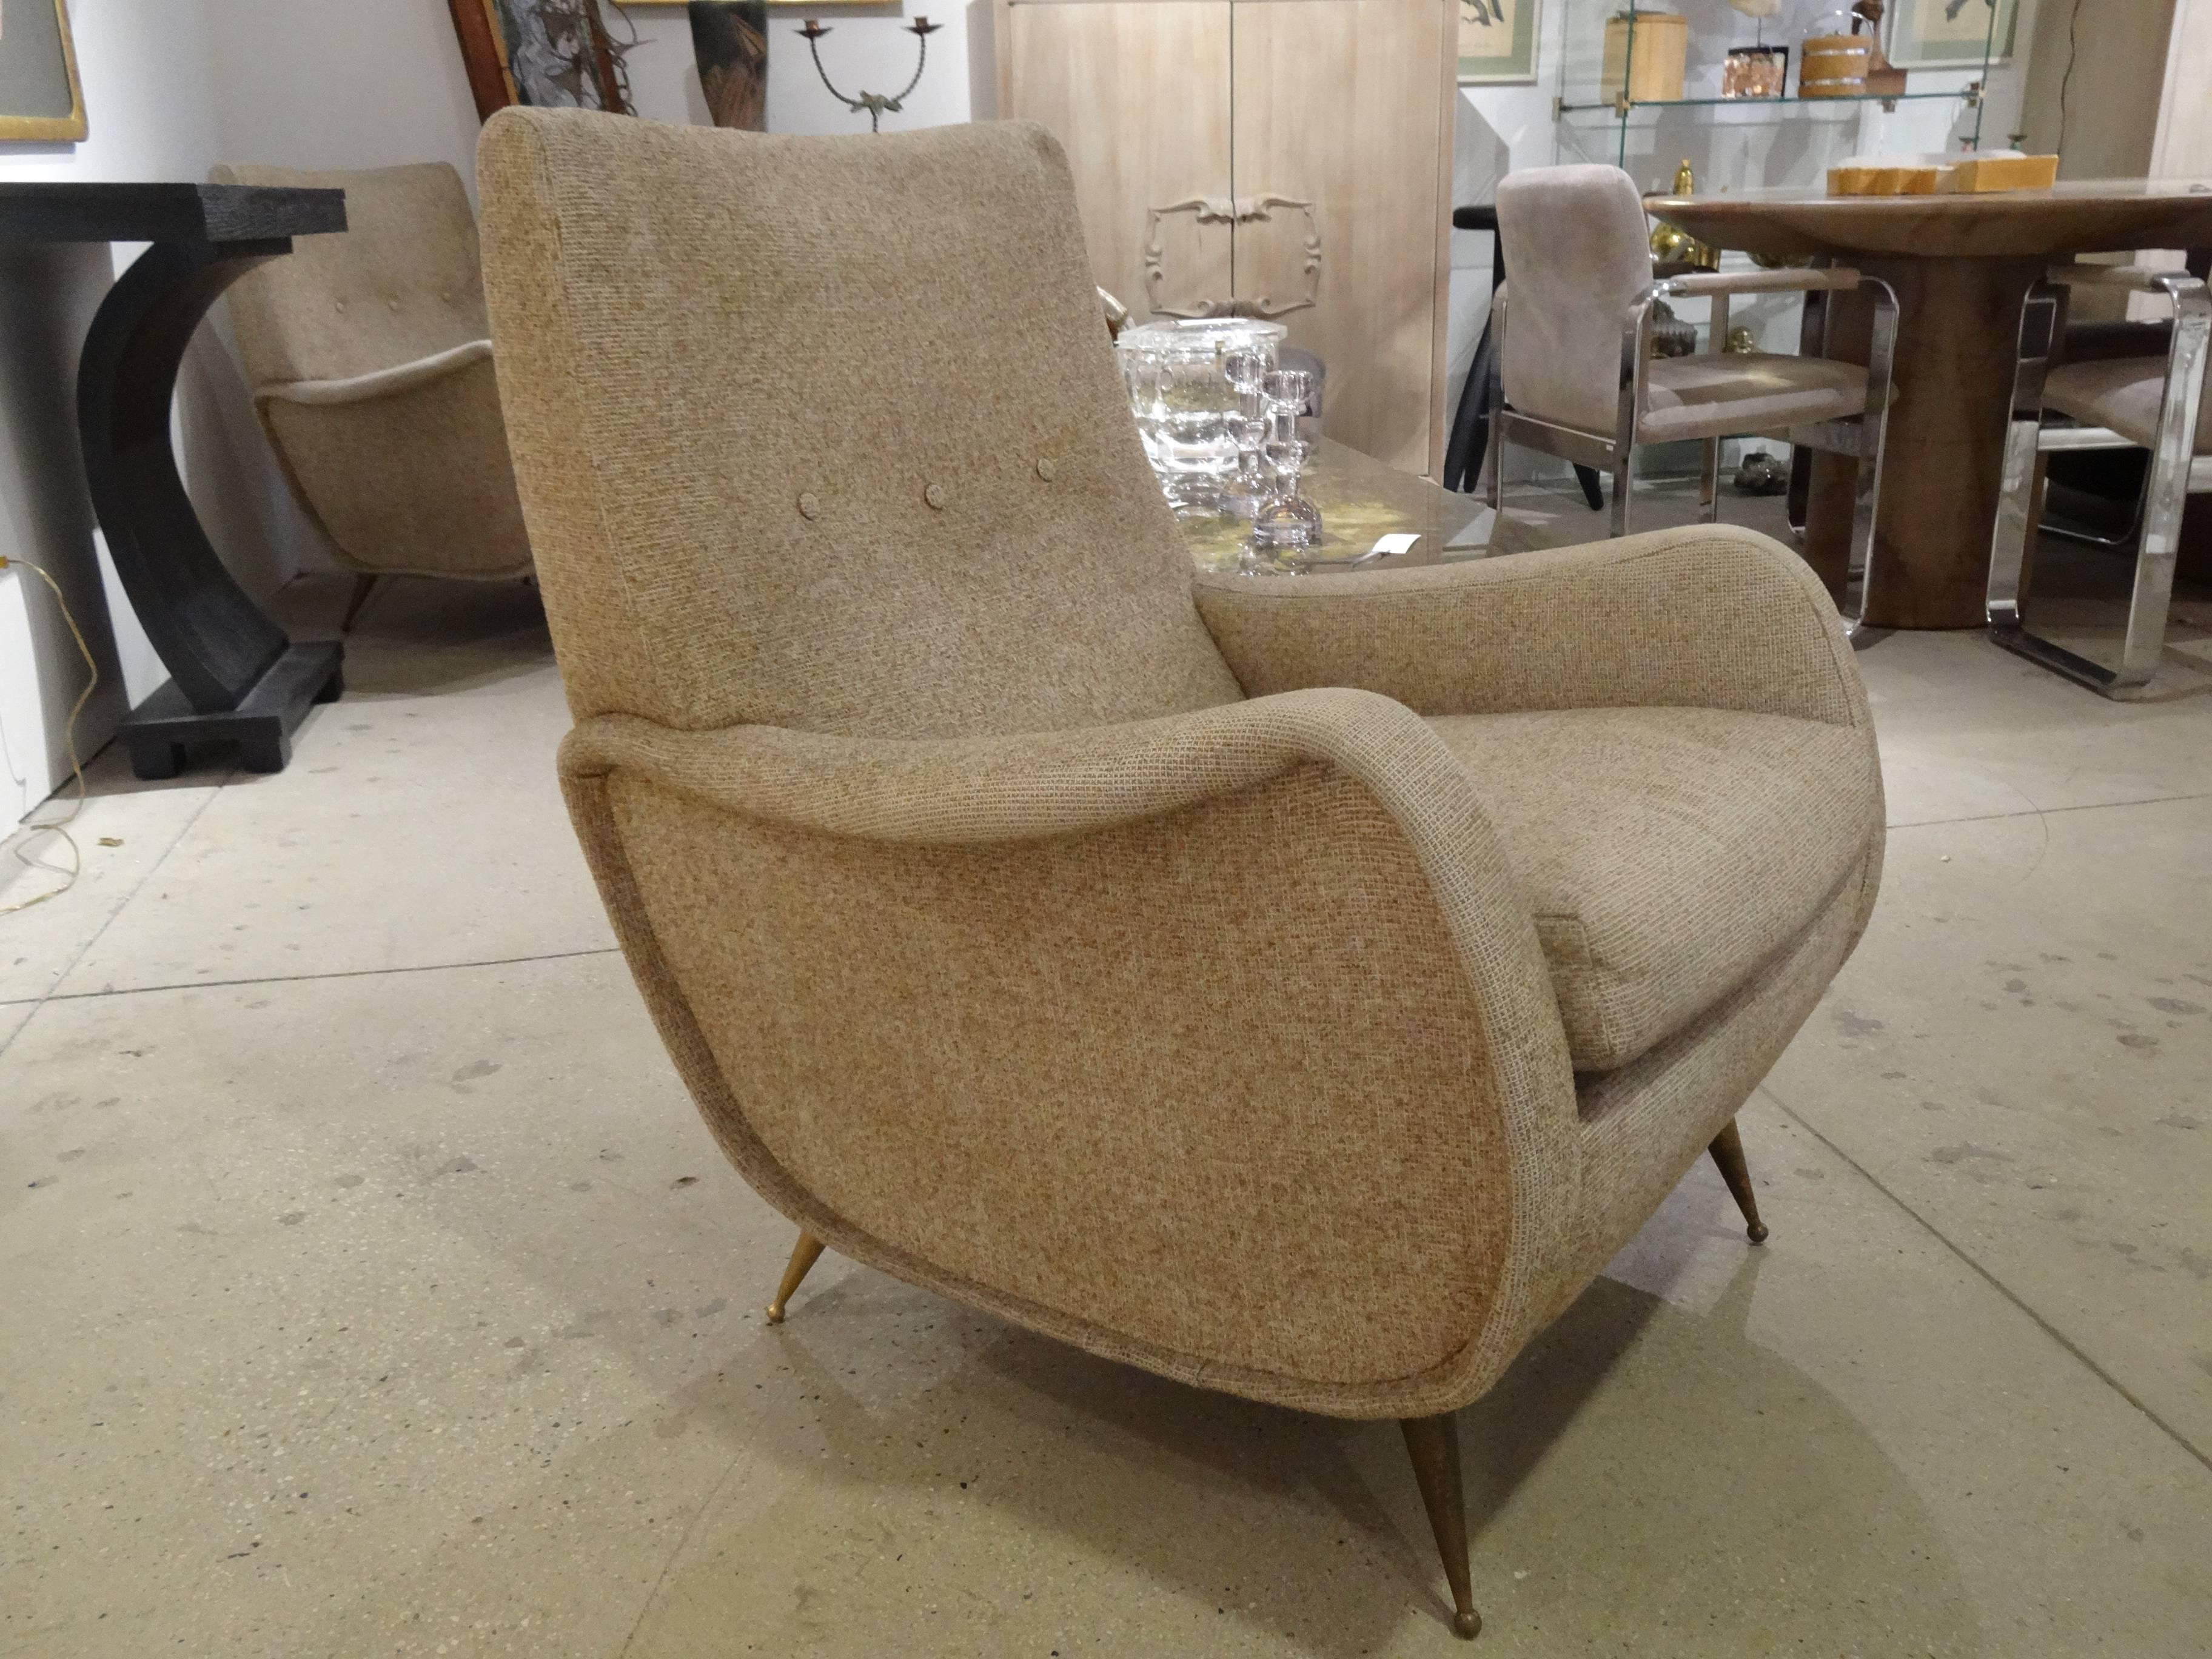 Pair of Mid-Century Modern Italian club chair with nice brass feet. In vintage condition. Wear on fabric.